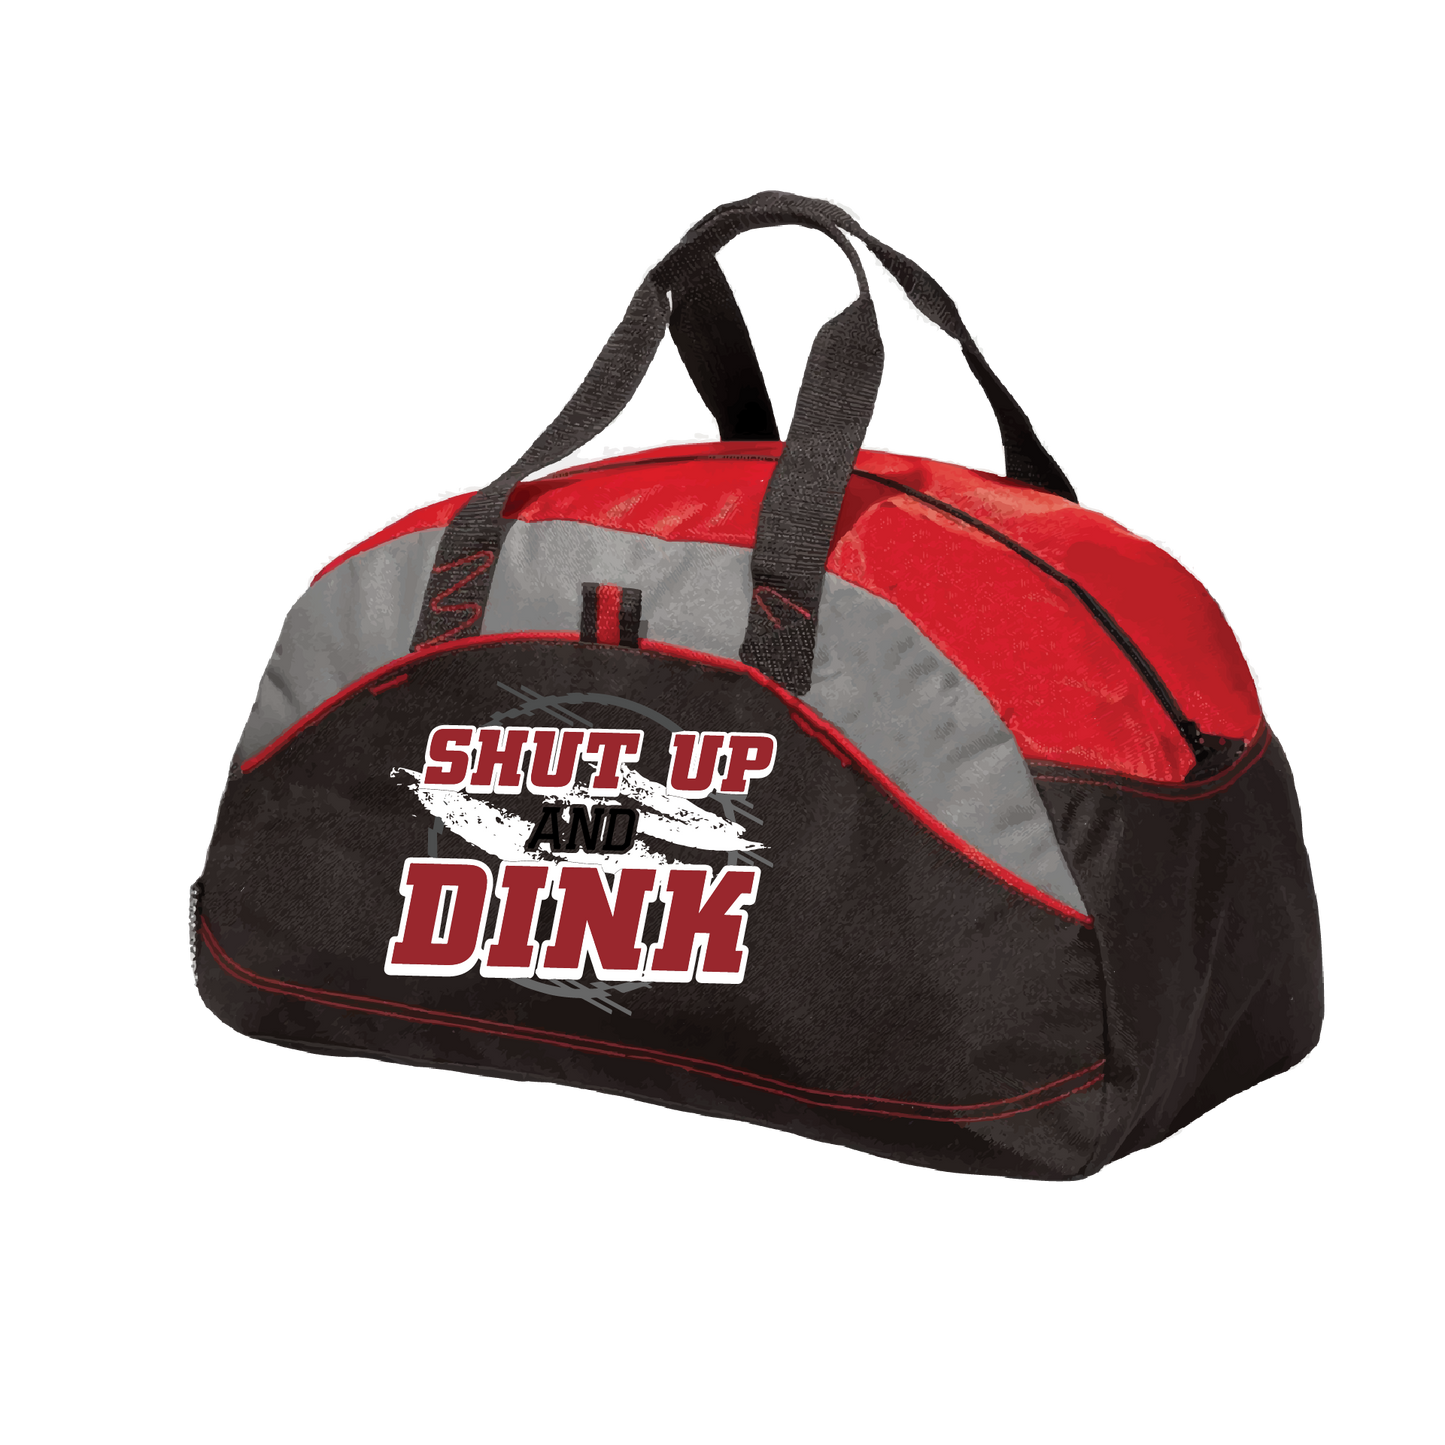 Pickleball Duffel bAg Design: Shut Up and Dink  Carry your gear in comfort and style. This fun pickleball duffel bag is the perfect accessory for all pickleball players needing to keep their gear in one place. This medium sized duffel tote is ideal for all your pickleball activities. The large center compartment allows for plenty of space and the mesh end pocket is perfect for holding a water bottle.